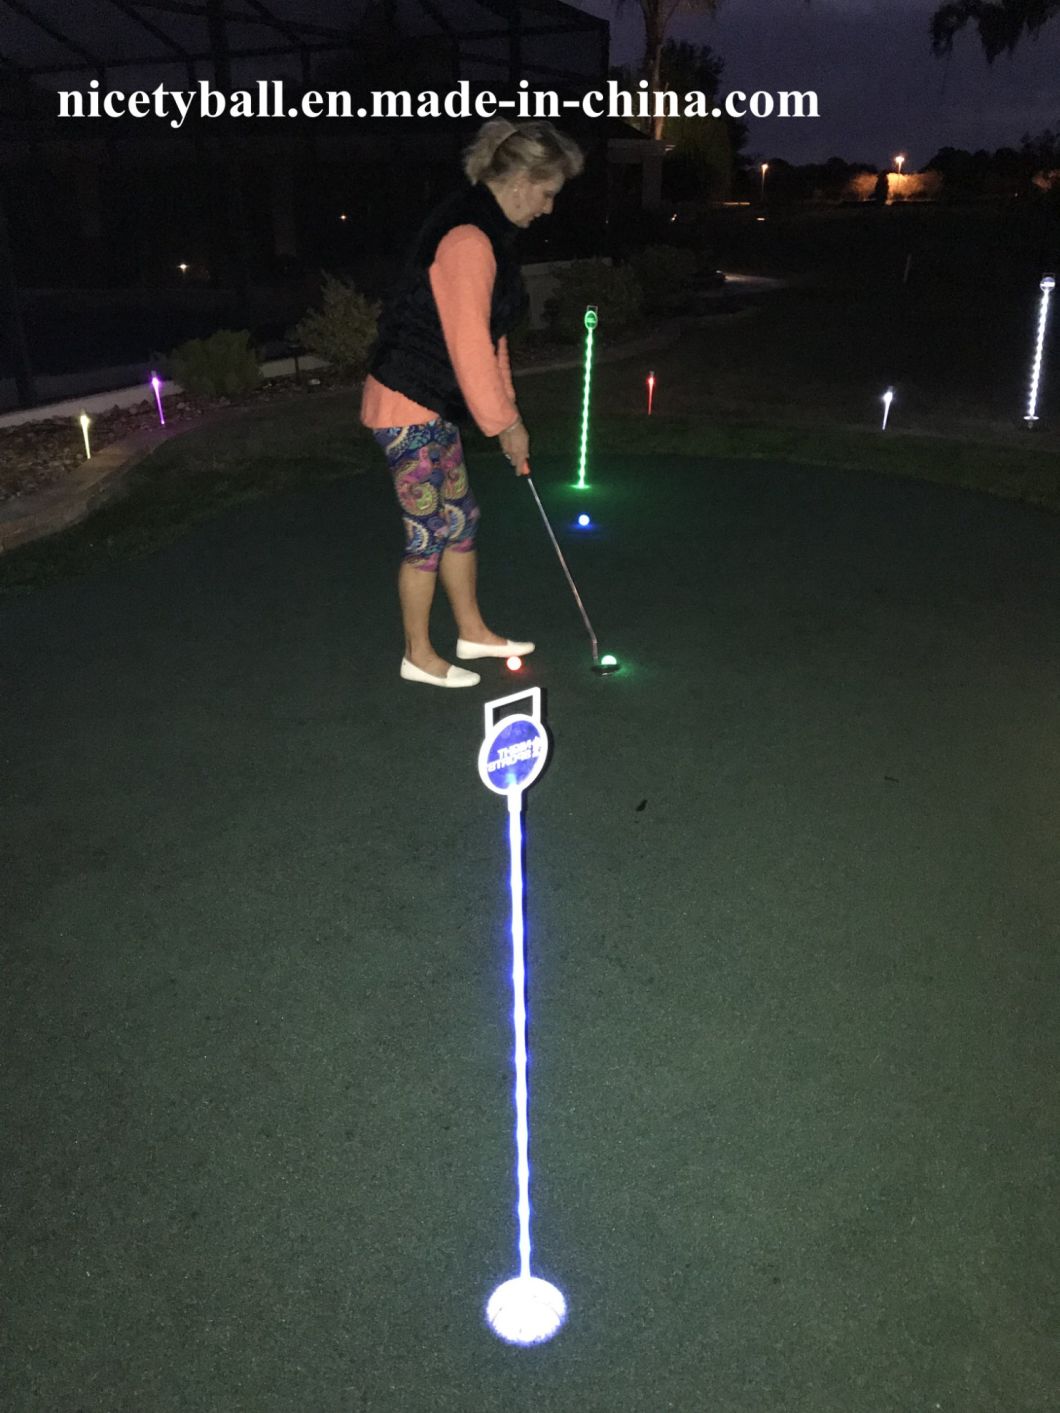 Golf Clubhouse Entertainment LED Night Golf Putting Set Light Your Backyard